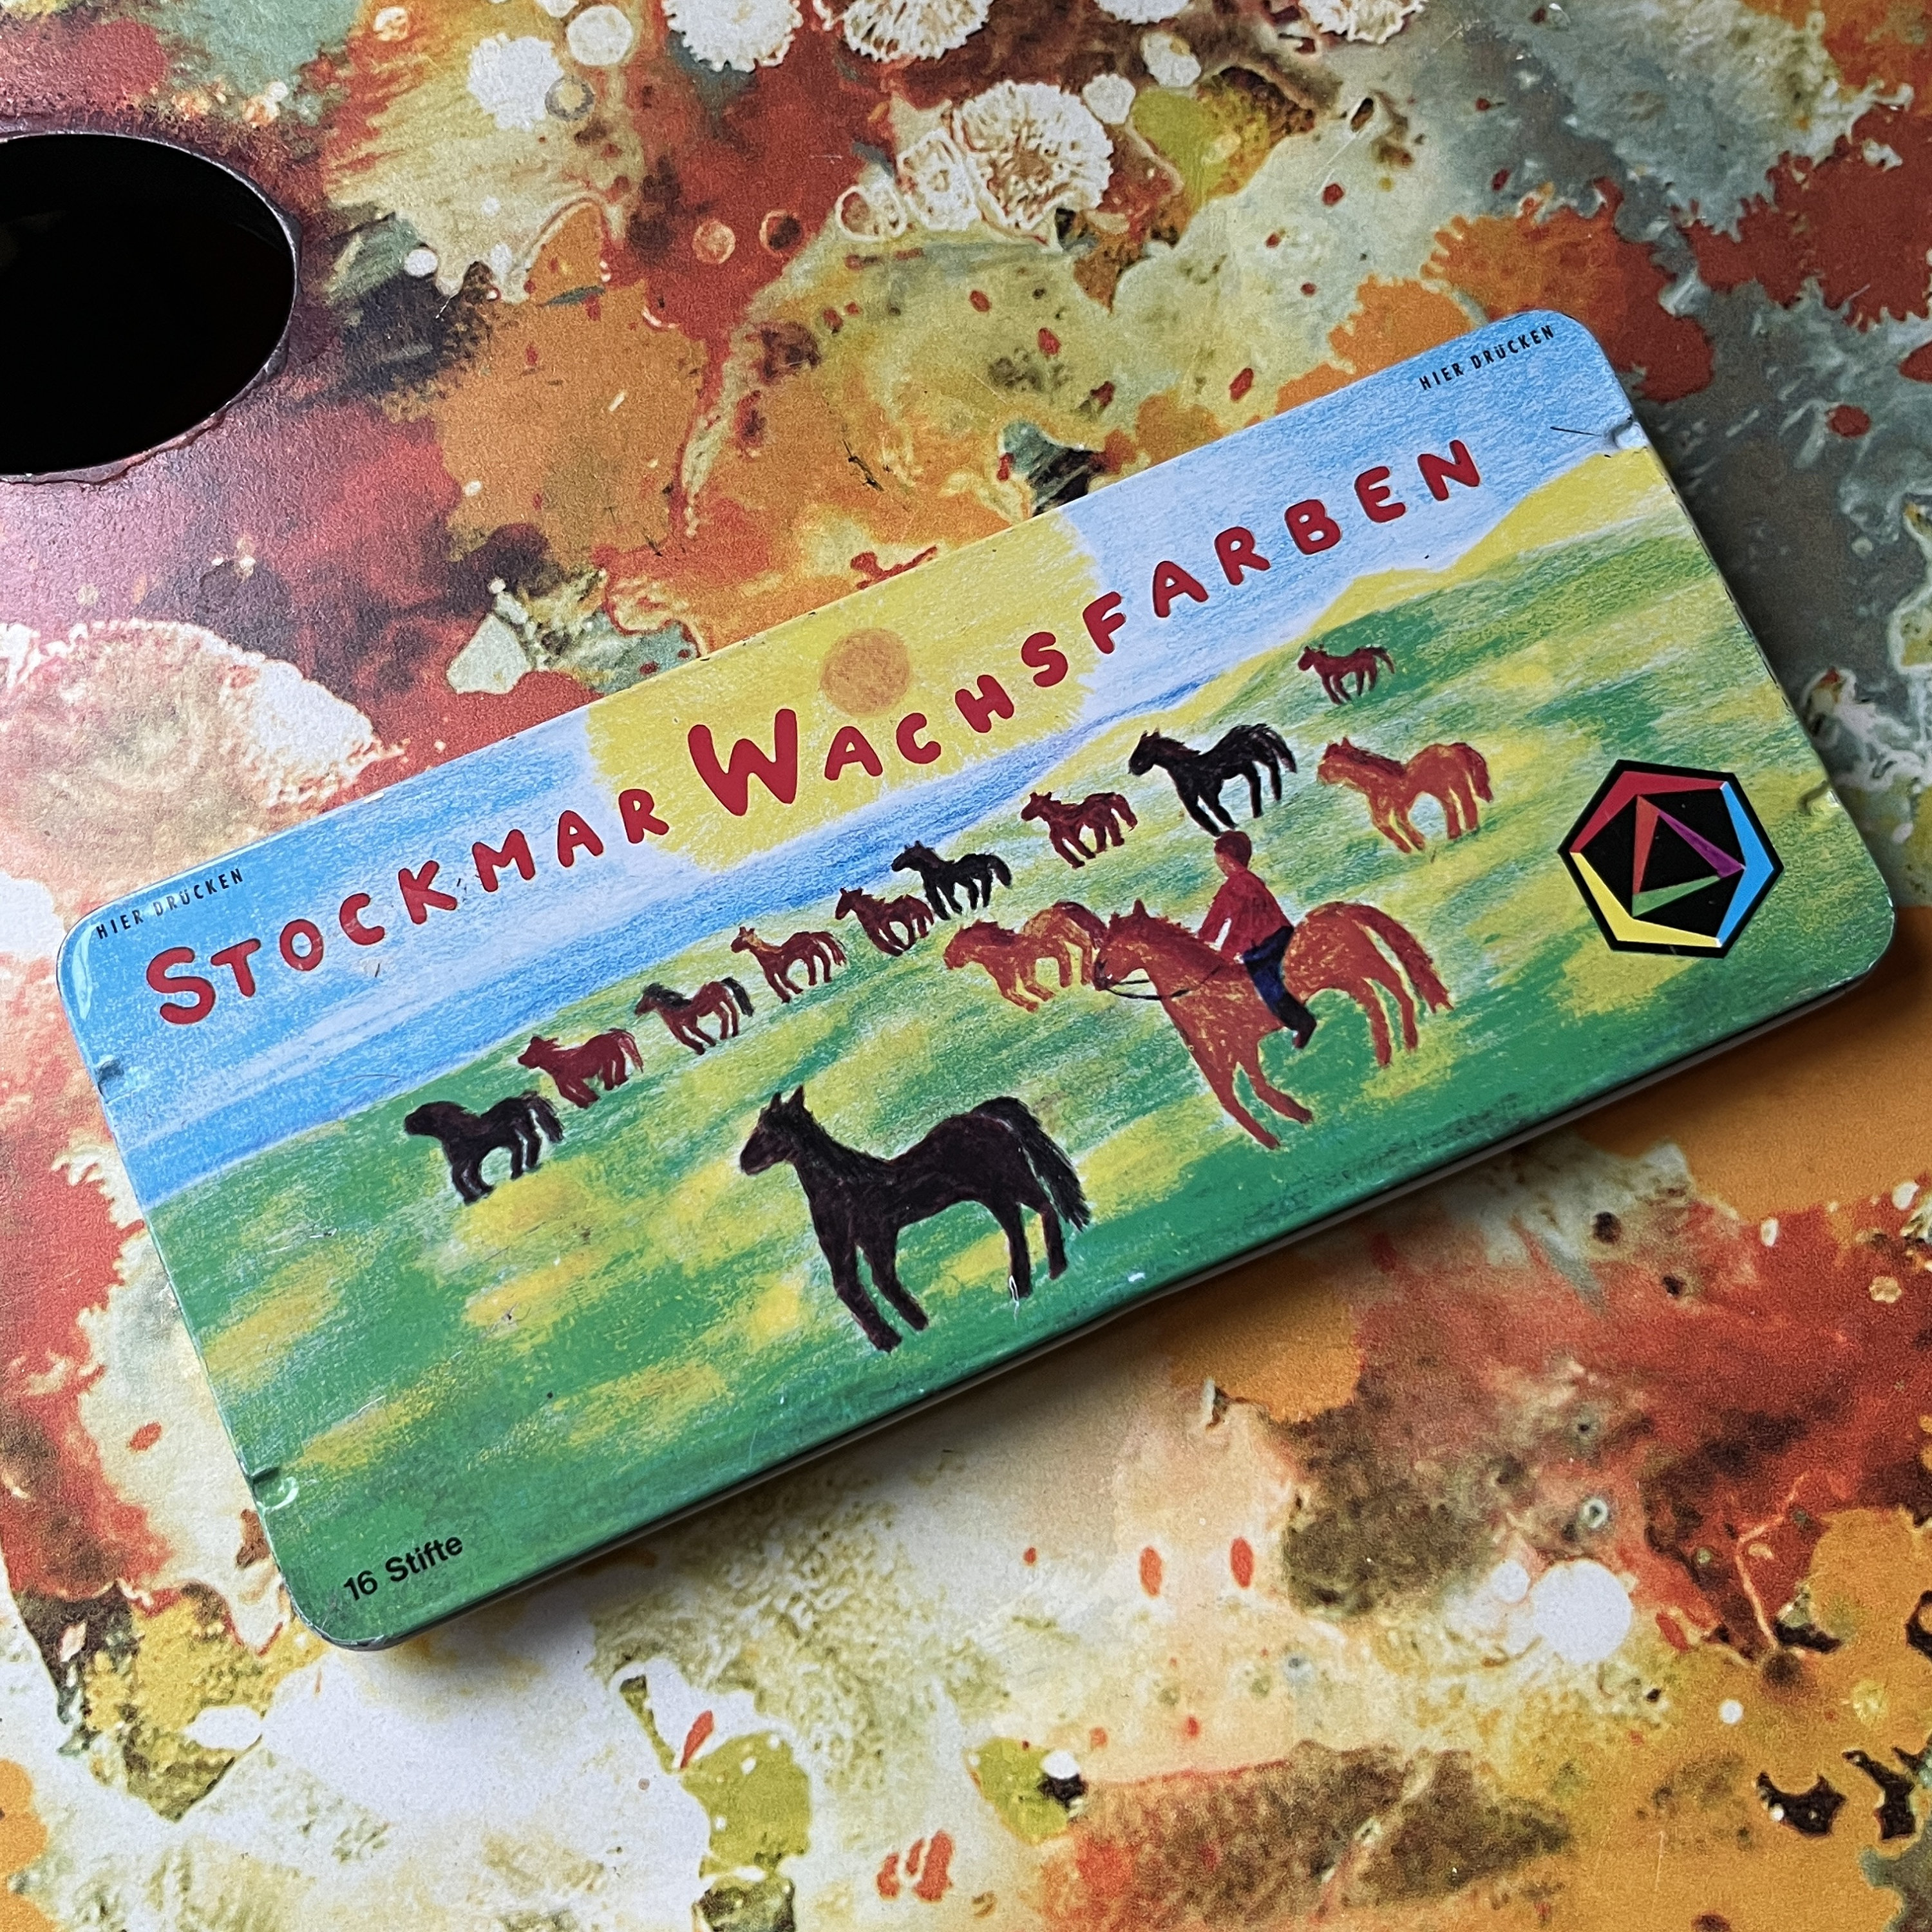 Stockmar Modeling Beeswax, Waldorf Homeschool Supply, Sensory Play, Art for  Children, Moulding, Goethe's Theory of Colors, Modeling Supply 